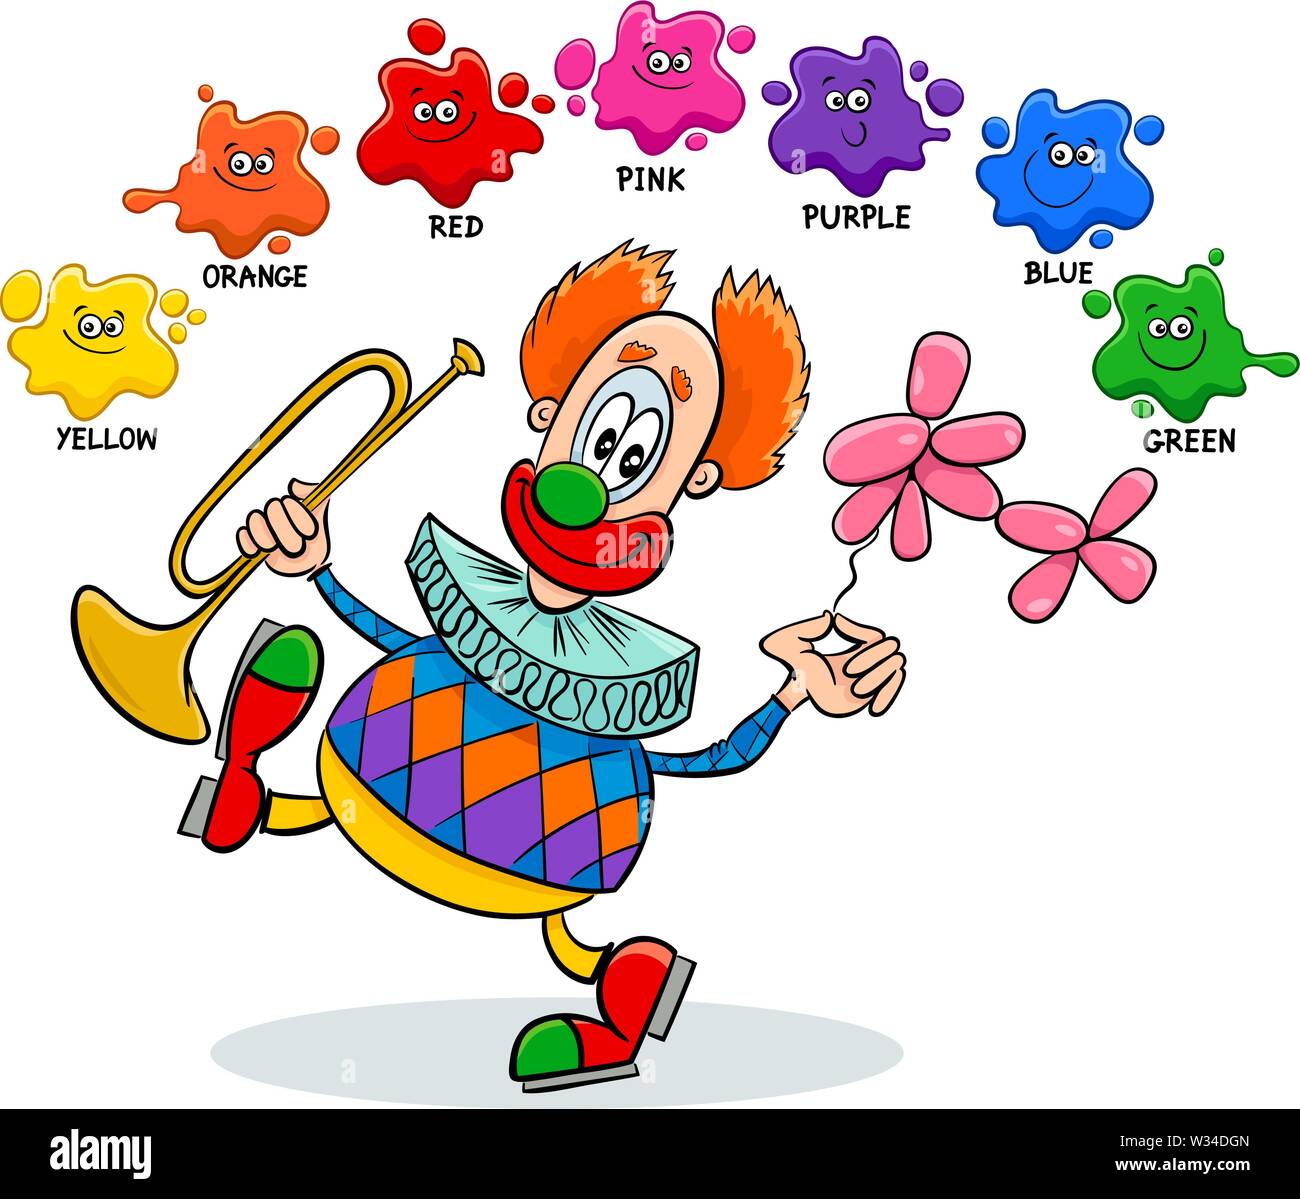 Cartoon Illustration of Basic Colors Educational Worksheet with Funny Clown Character Stock Vector